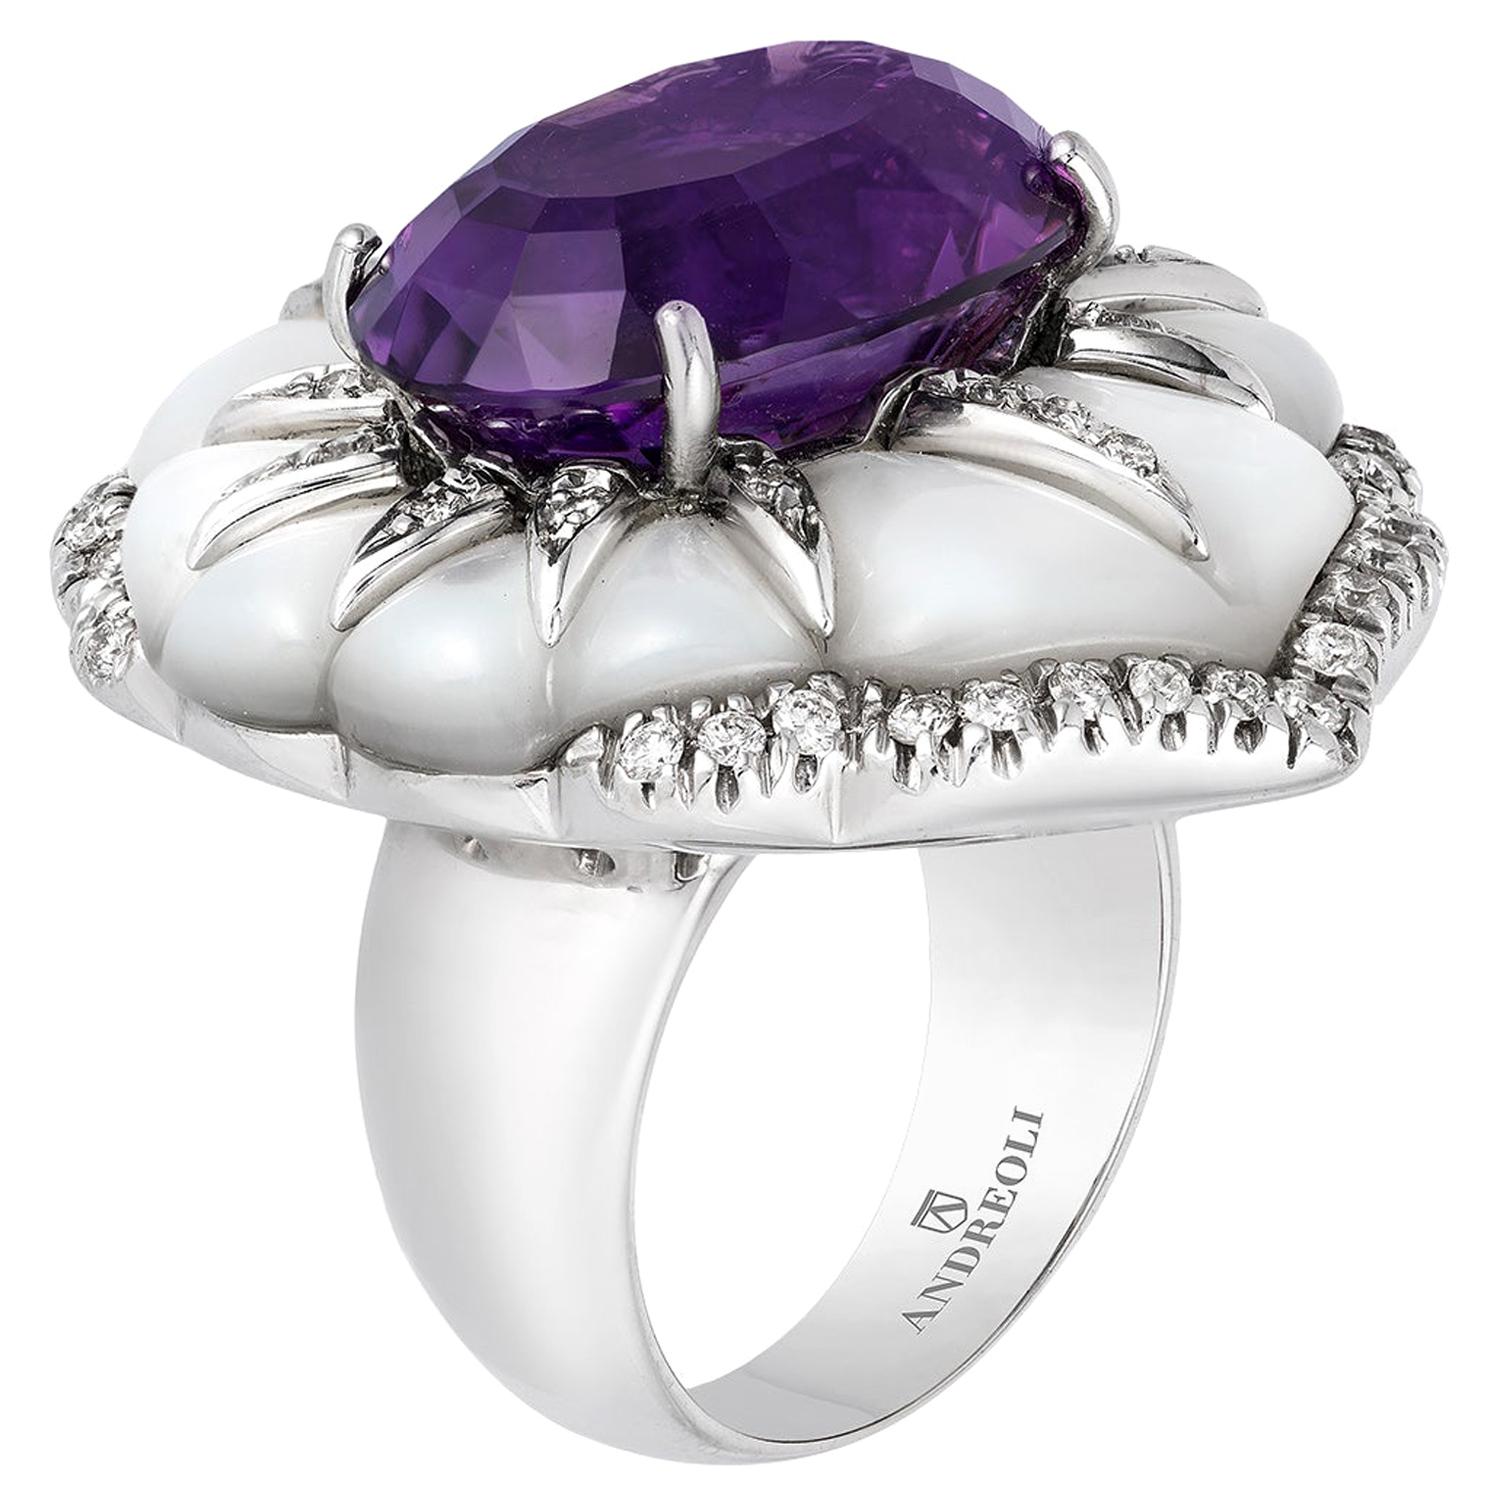 Andreoli Amethyst Mother of Pearl Diamond Cocktail Ring 18 Karat White Gold